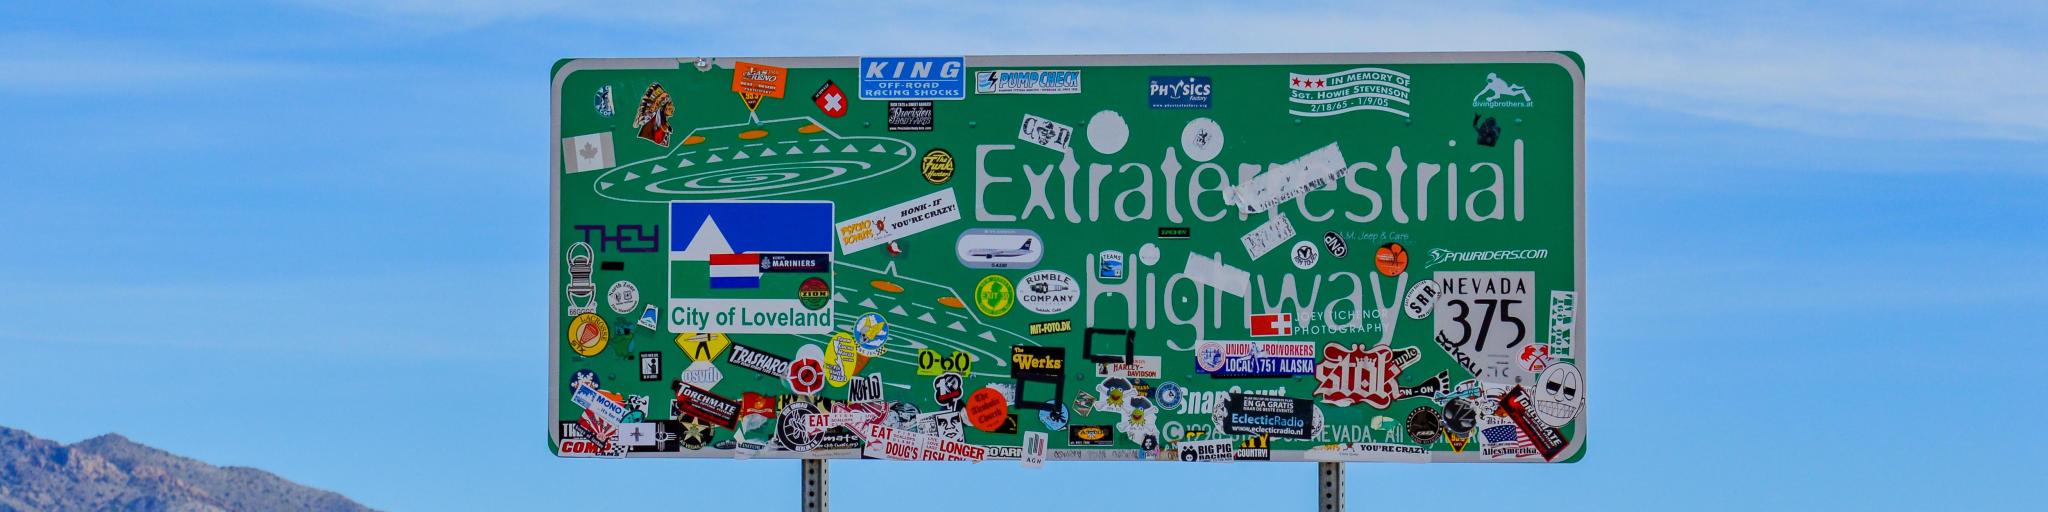 View of the famous Extraterrestrial Highway road sign in Nevada, USA